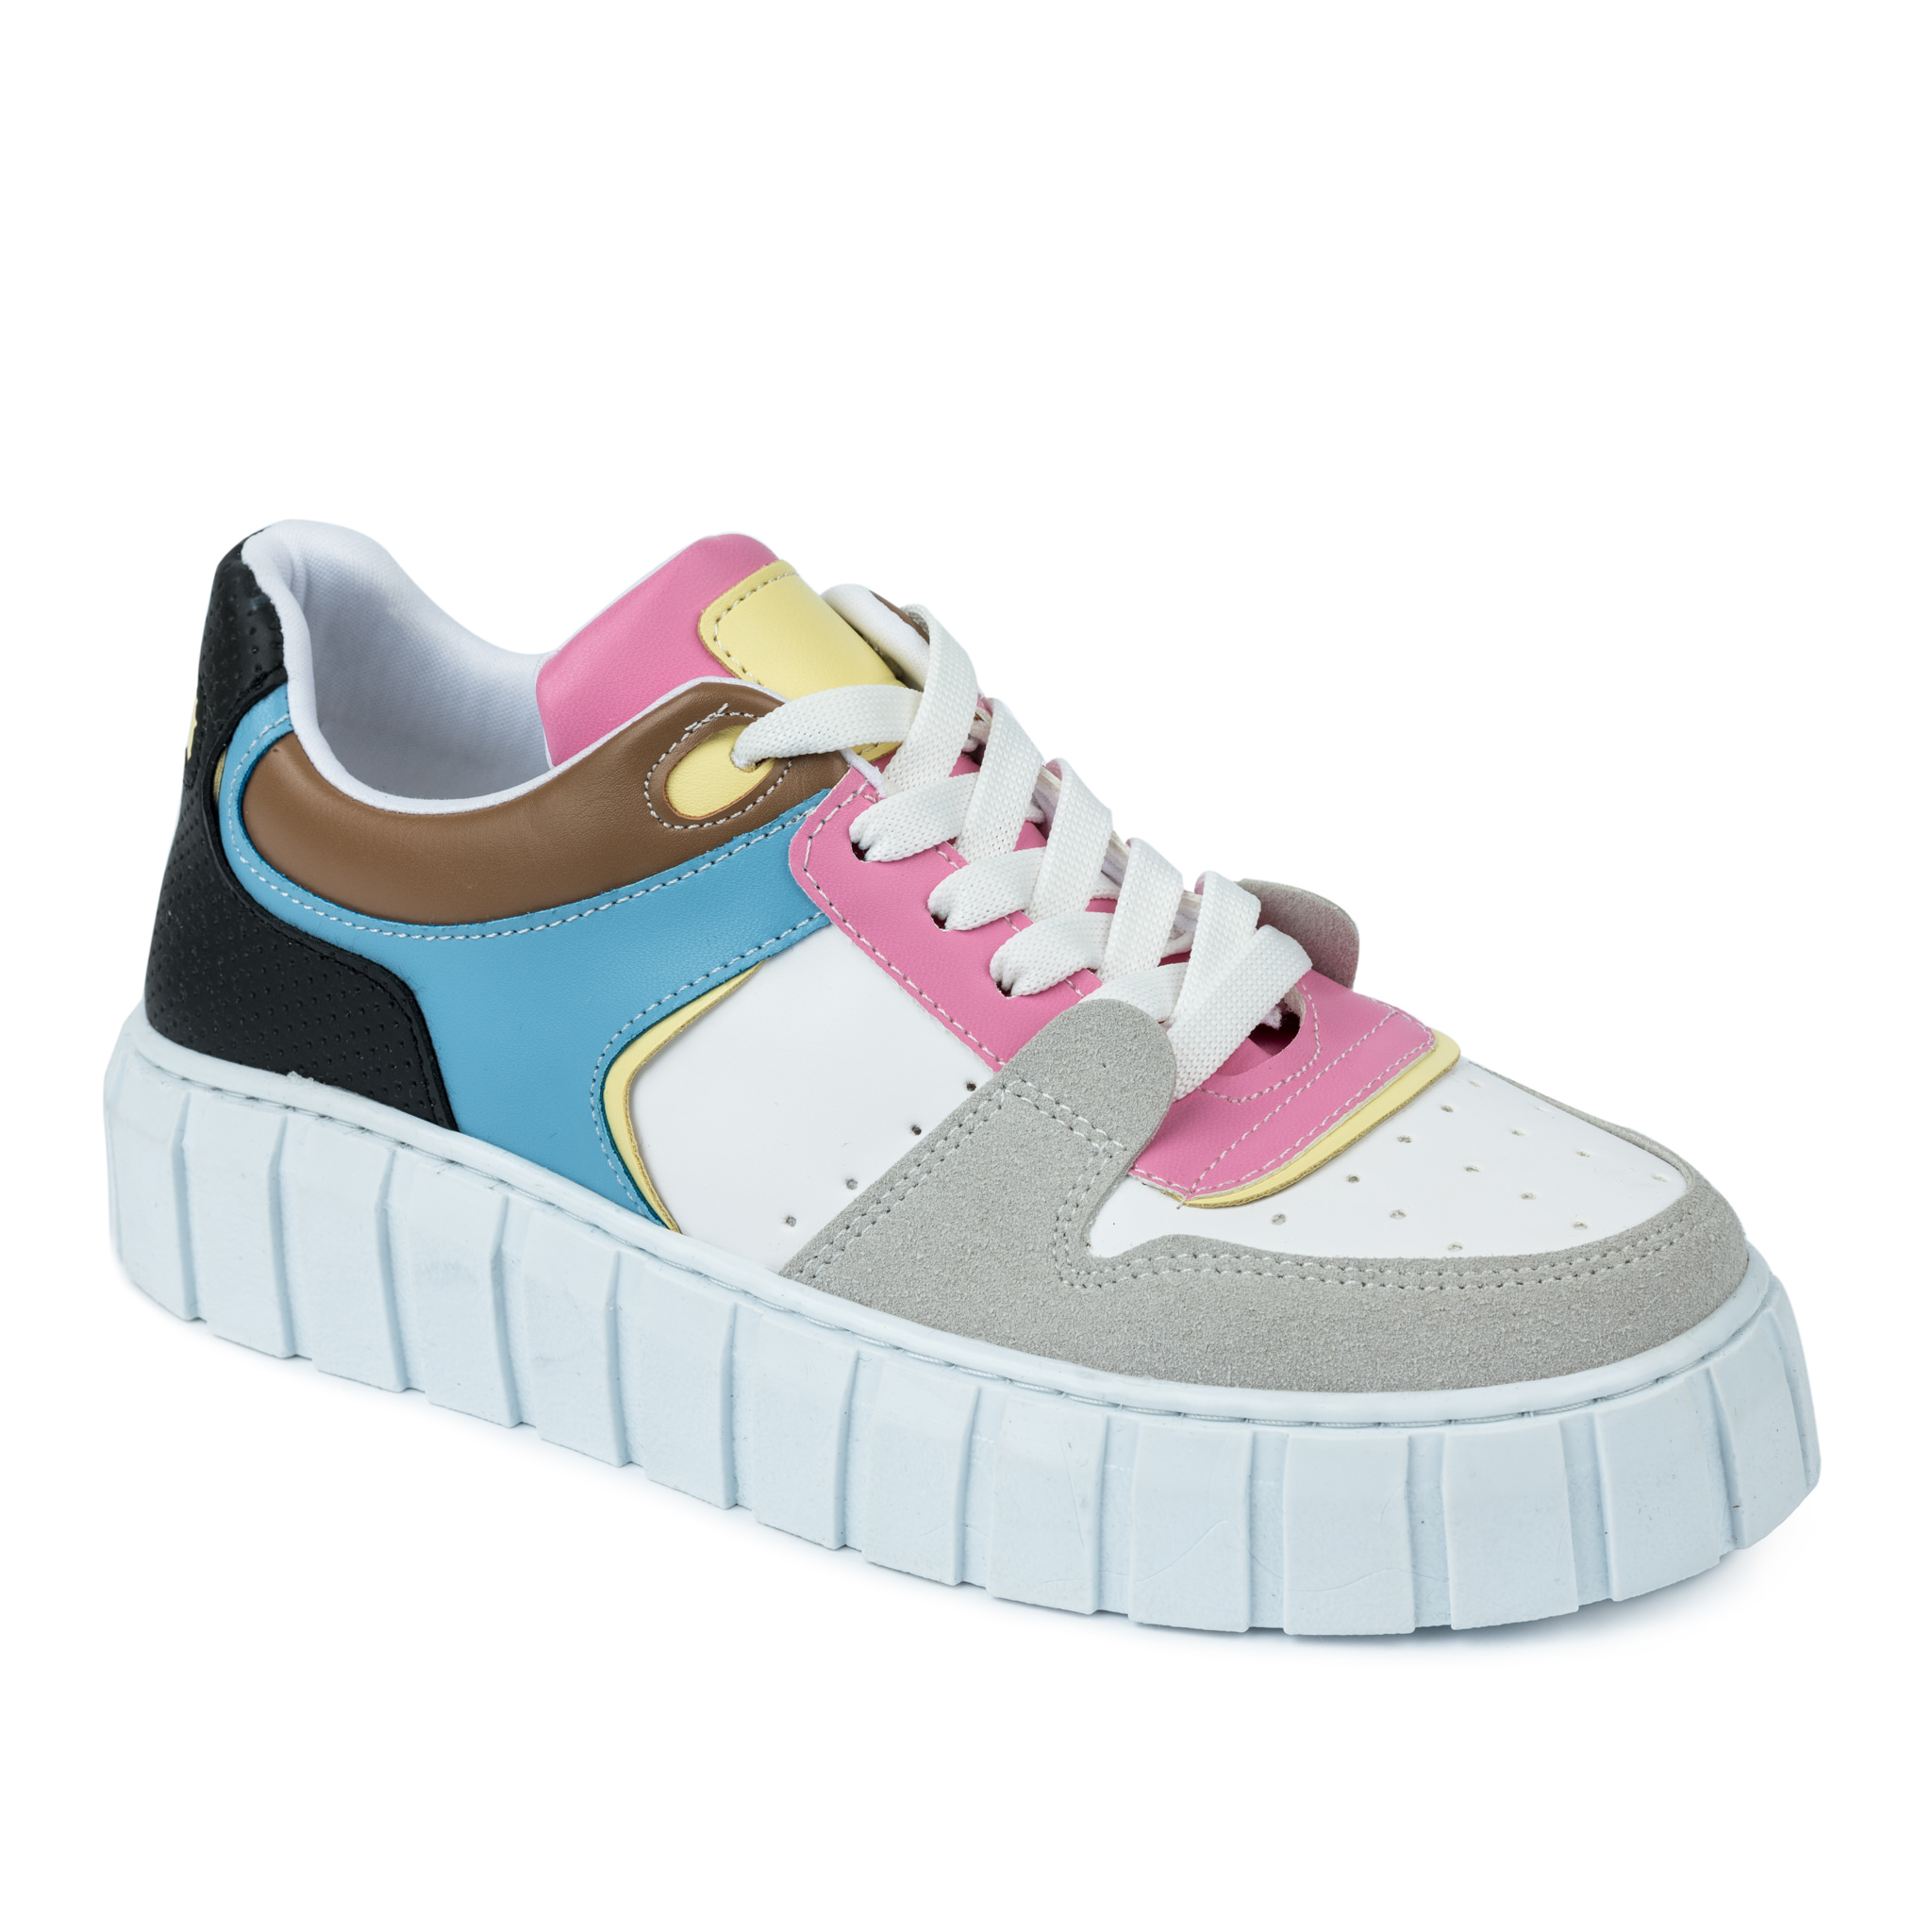 SNEAKERS WITH HIGH SOLE - WHITE/ROSE